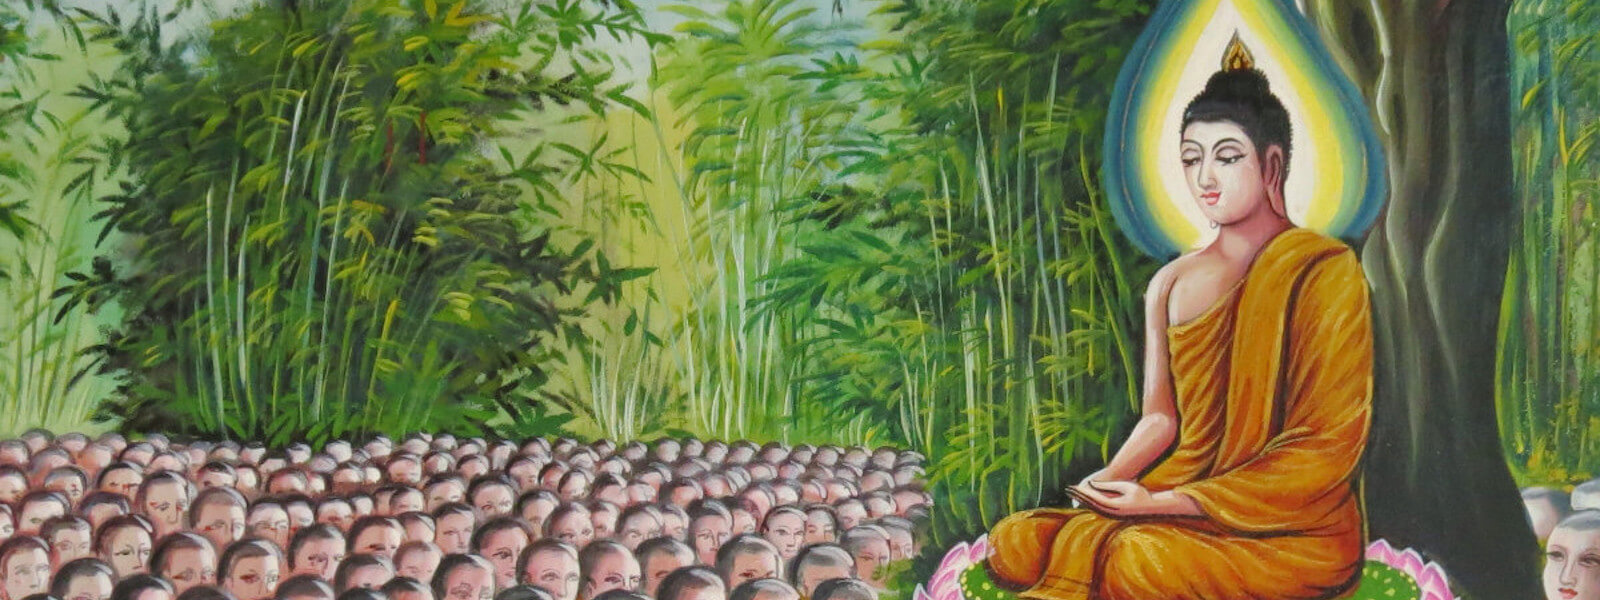 Painting of the Buddha teaching many monks. It's likely a mural in a Thai temple.